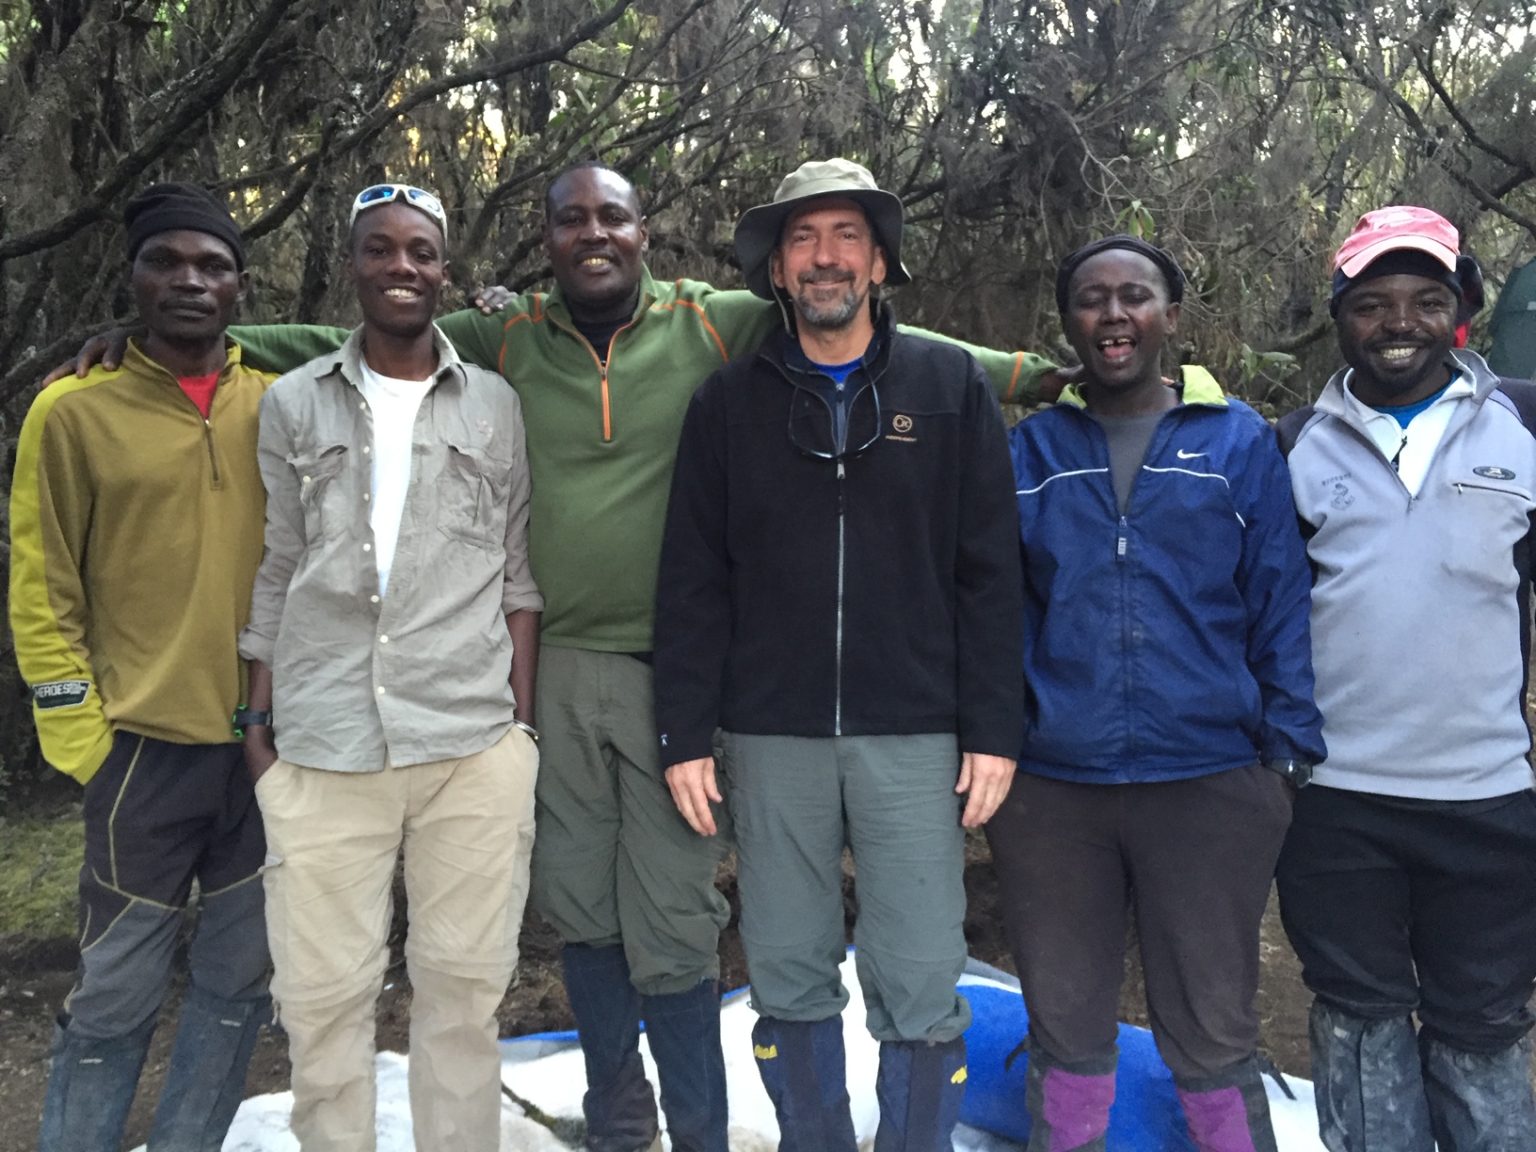 Porters and mountain guides on Mount Kilimanjaro with Mountain Madness Tour Group